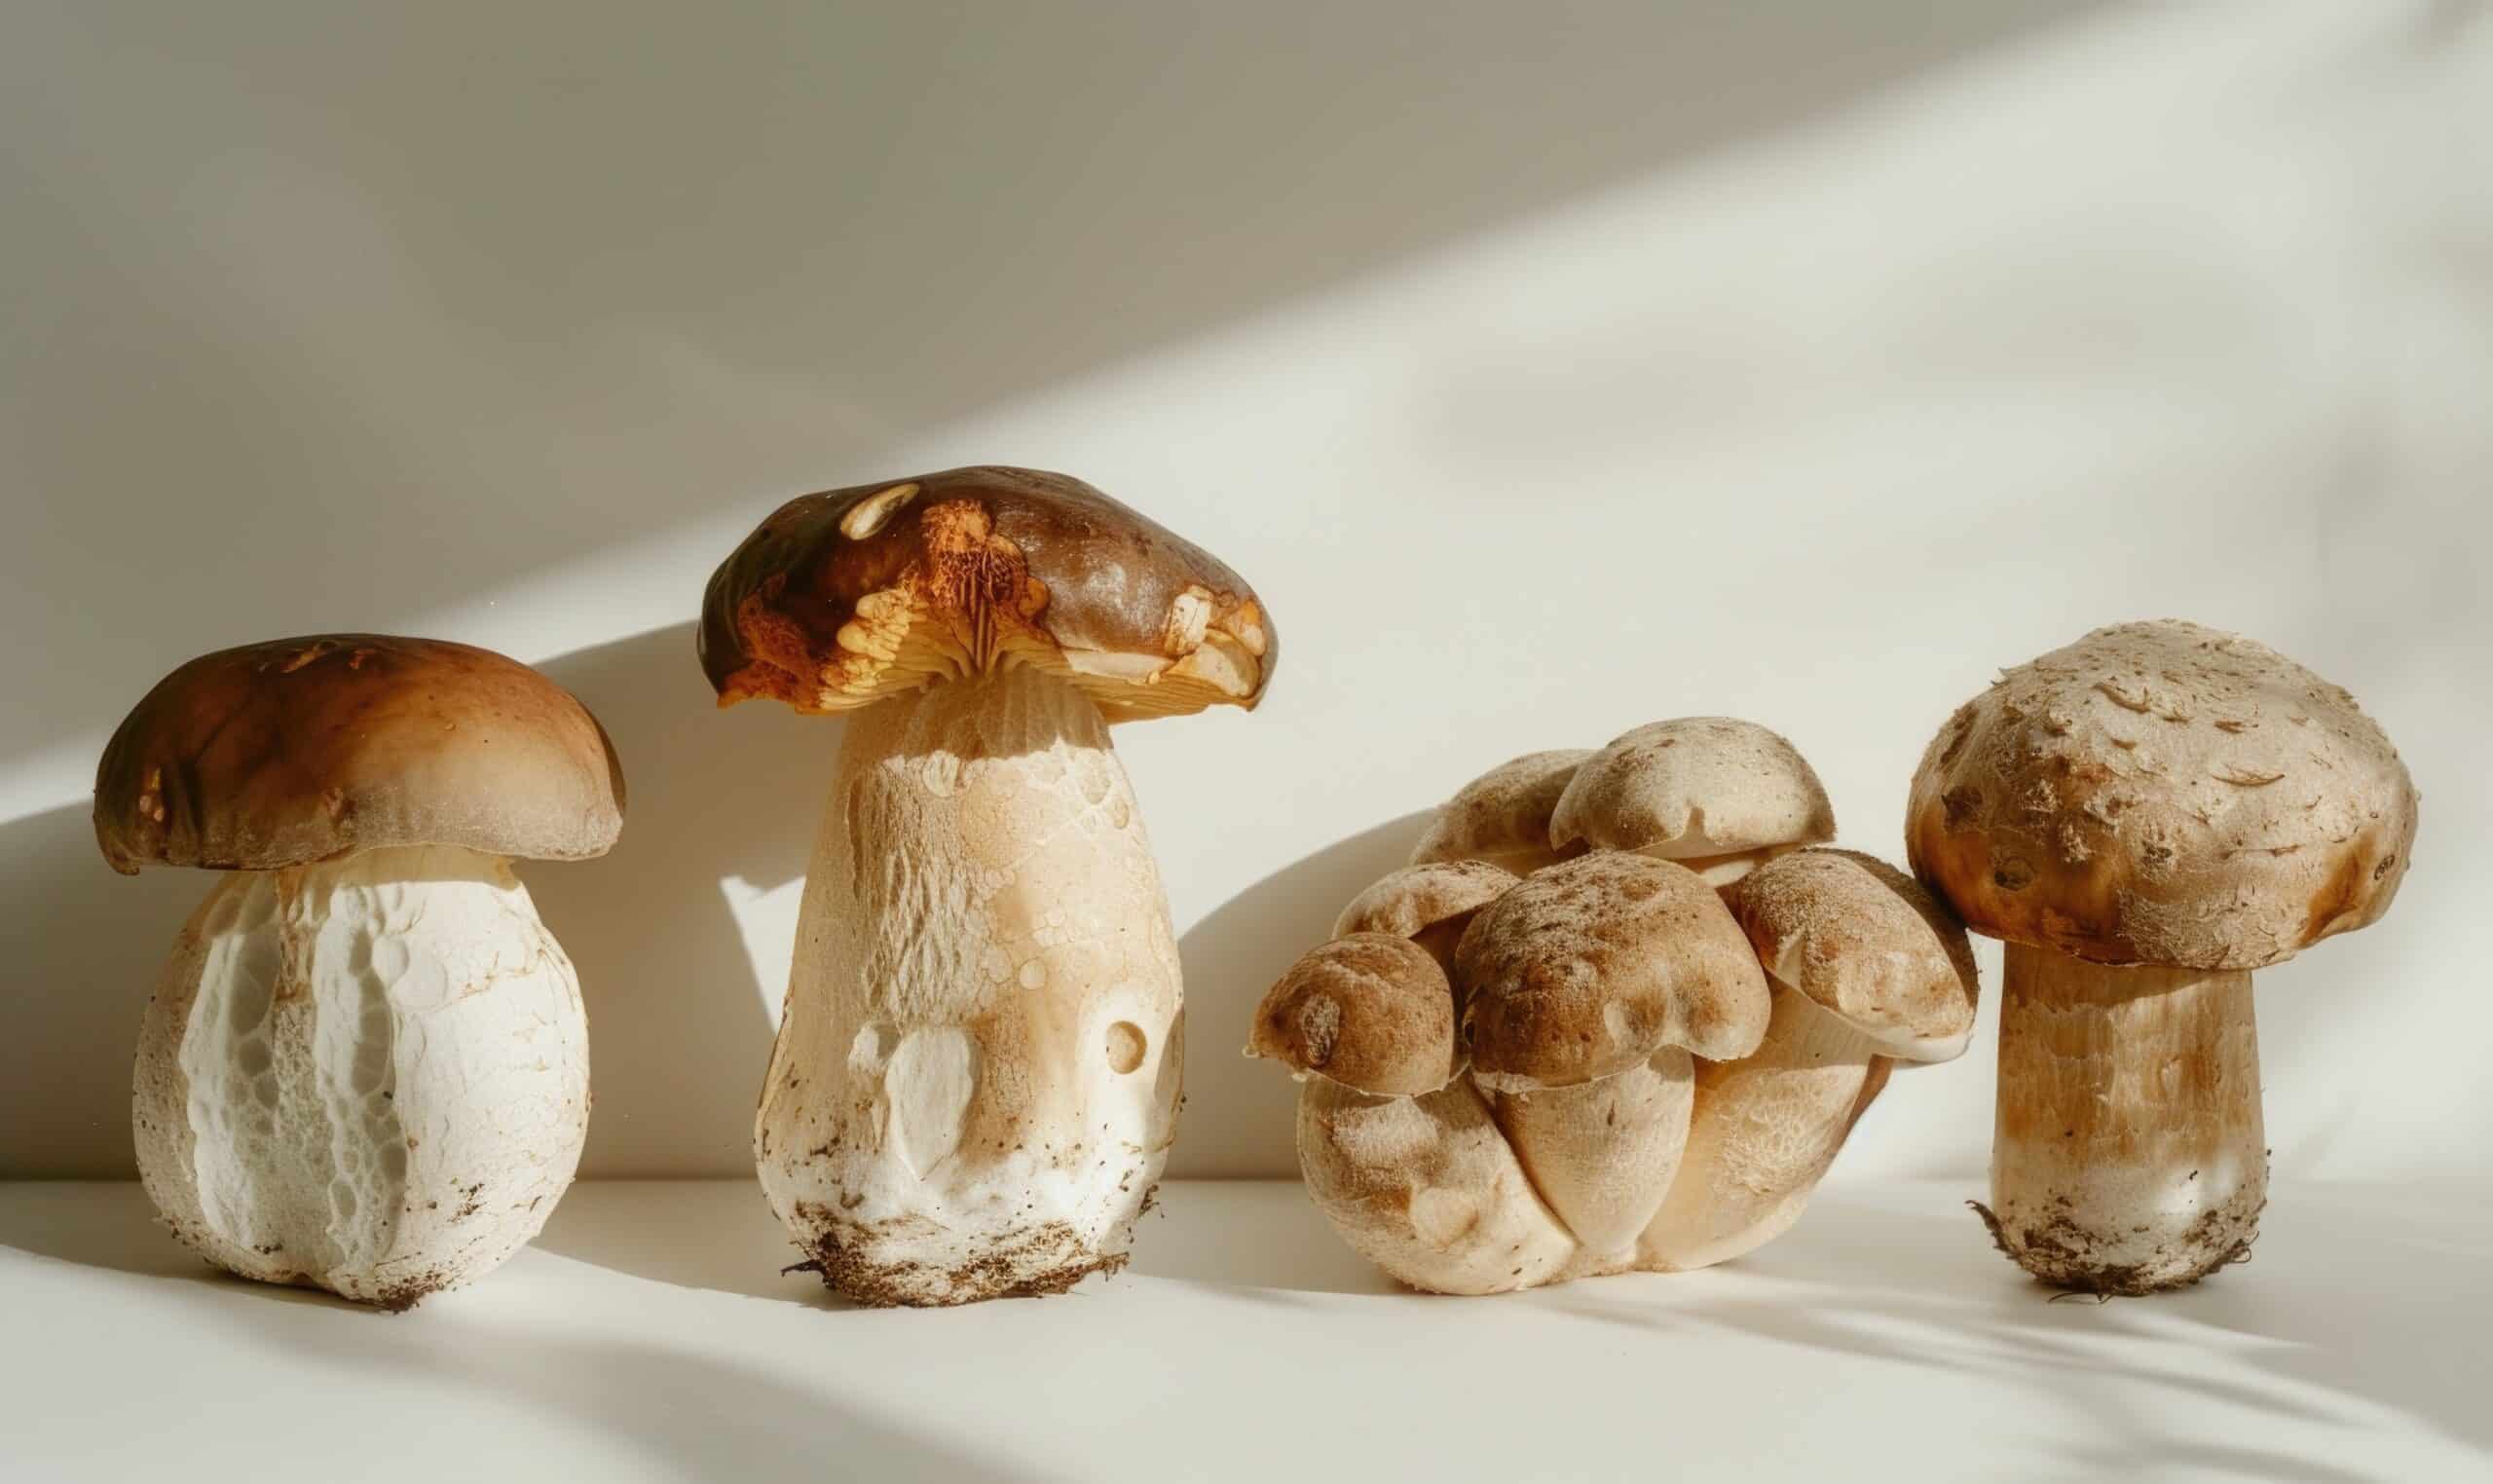 growmyownhealthfood.com : What's the process for growing mushrooms at home?